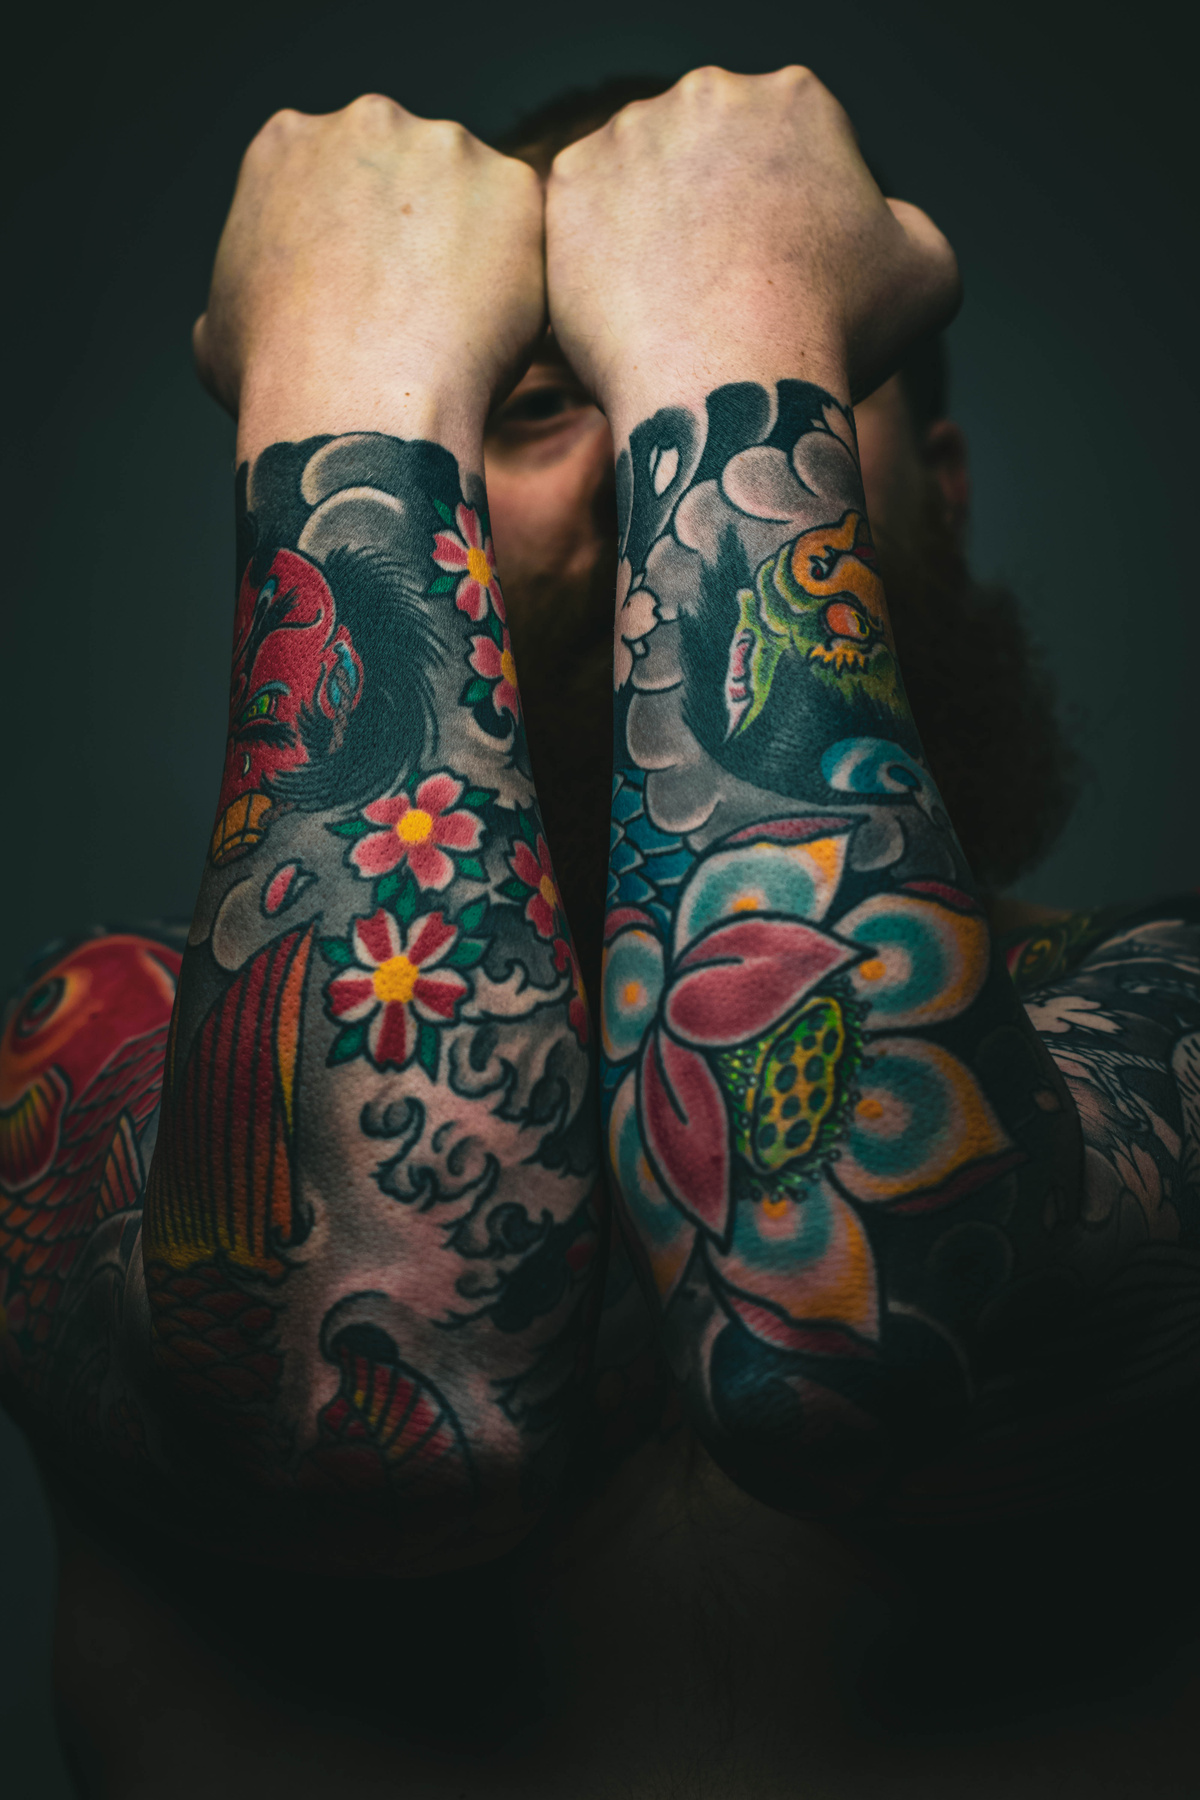 Man With Floral Arm Tattoos`